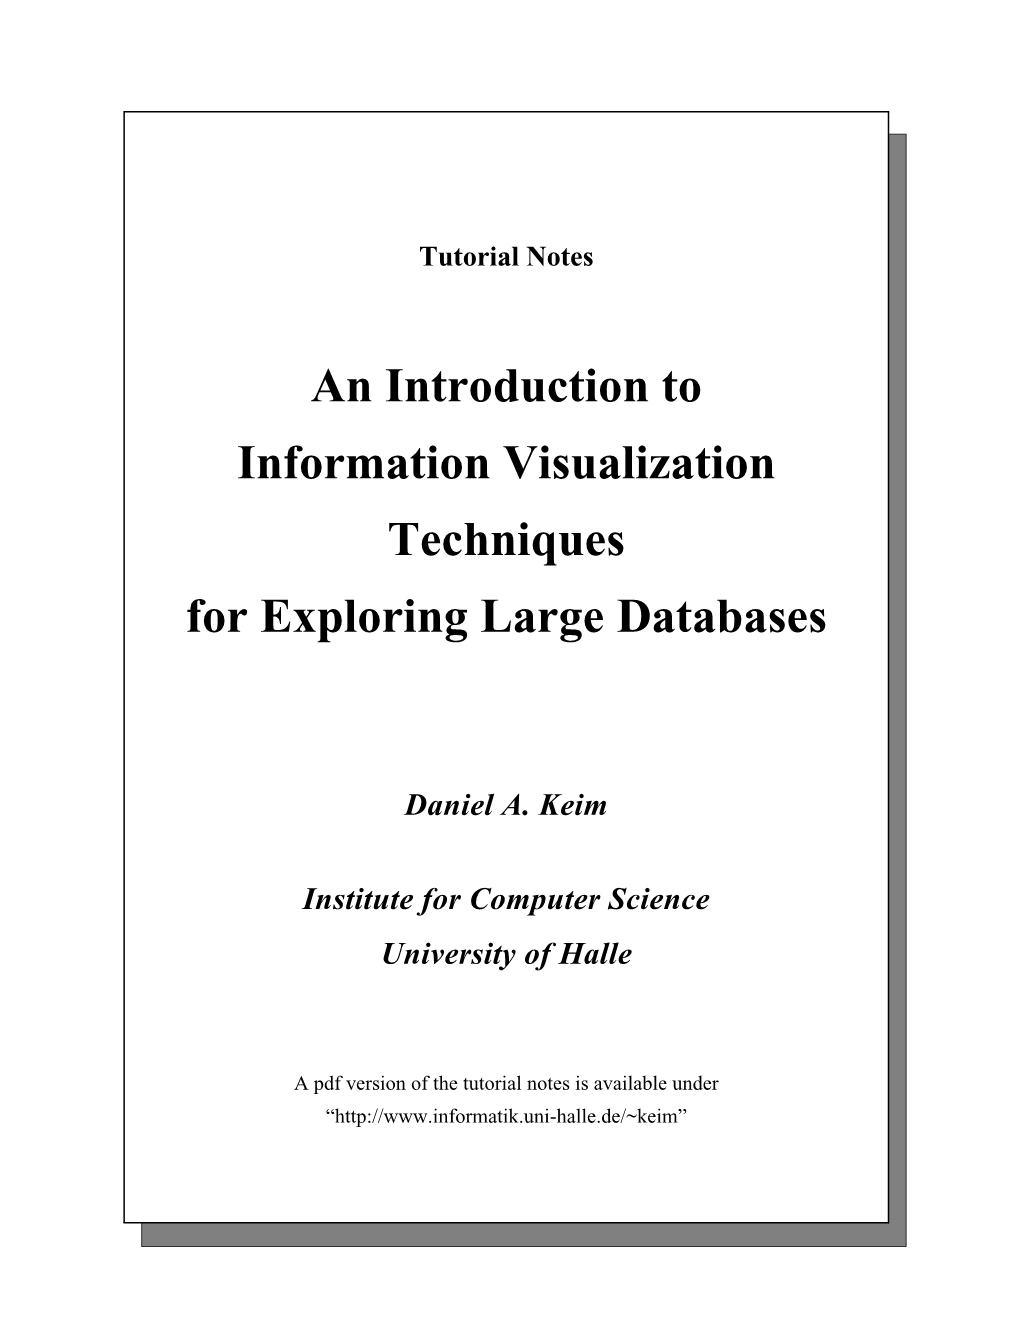 An Introduction to Information Visualization Techniques for Exploring Large Databases